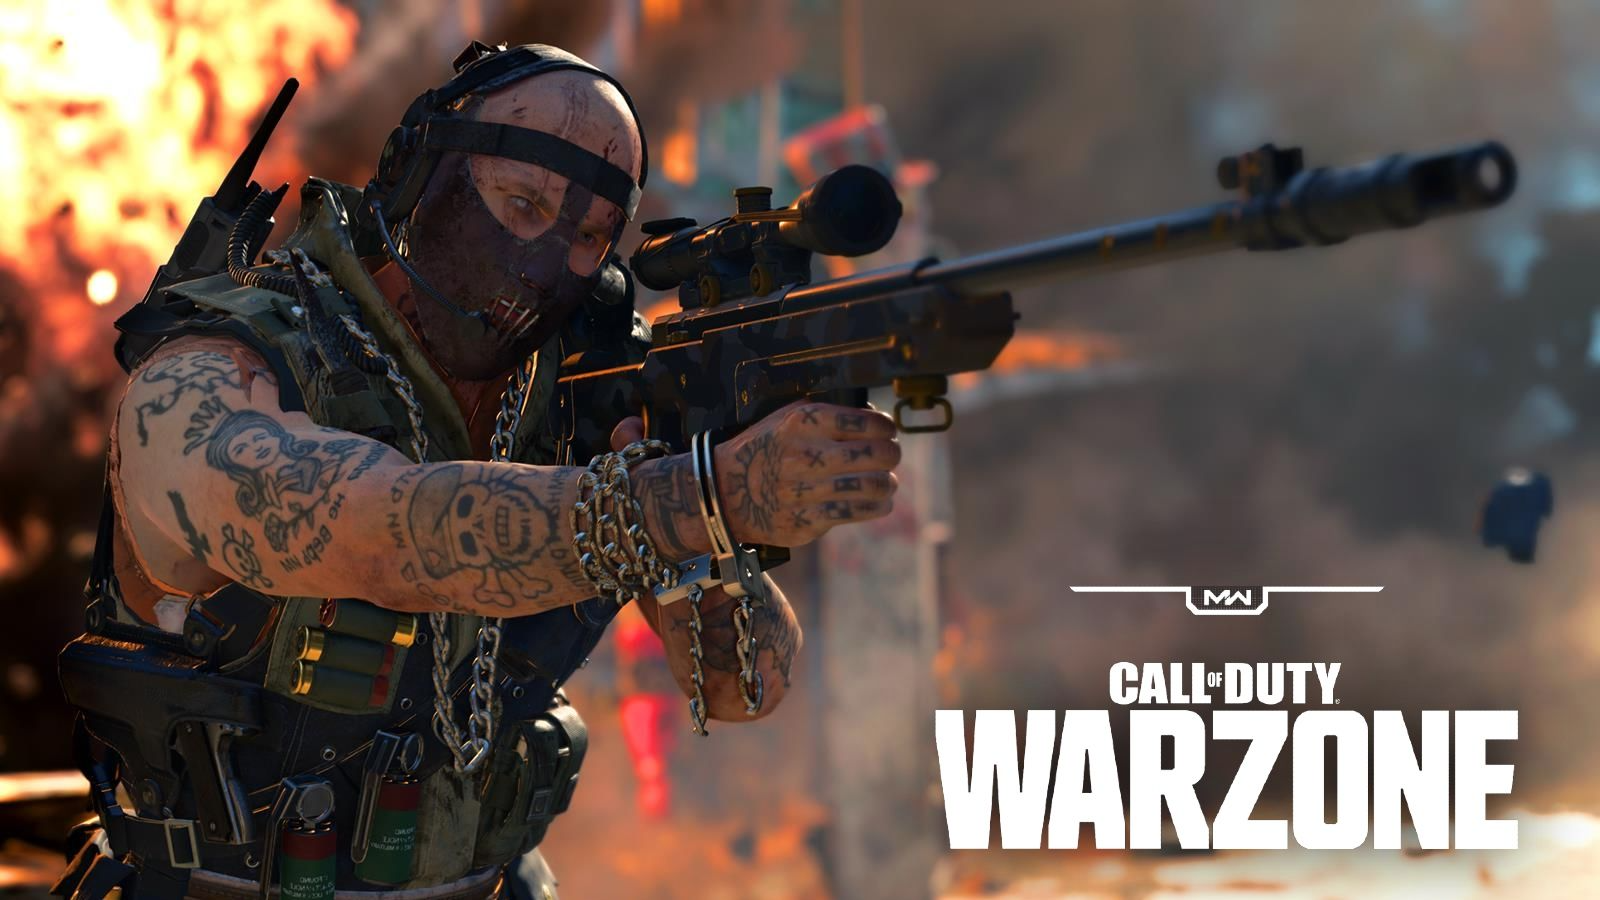 How to Download Warzone 2 on PC & Laptop - FREE 